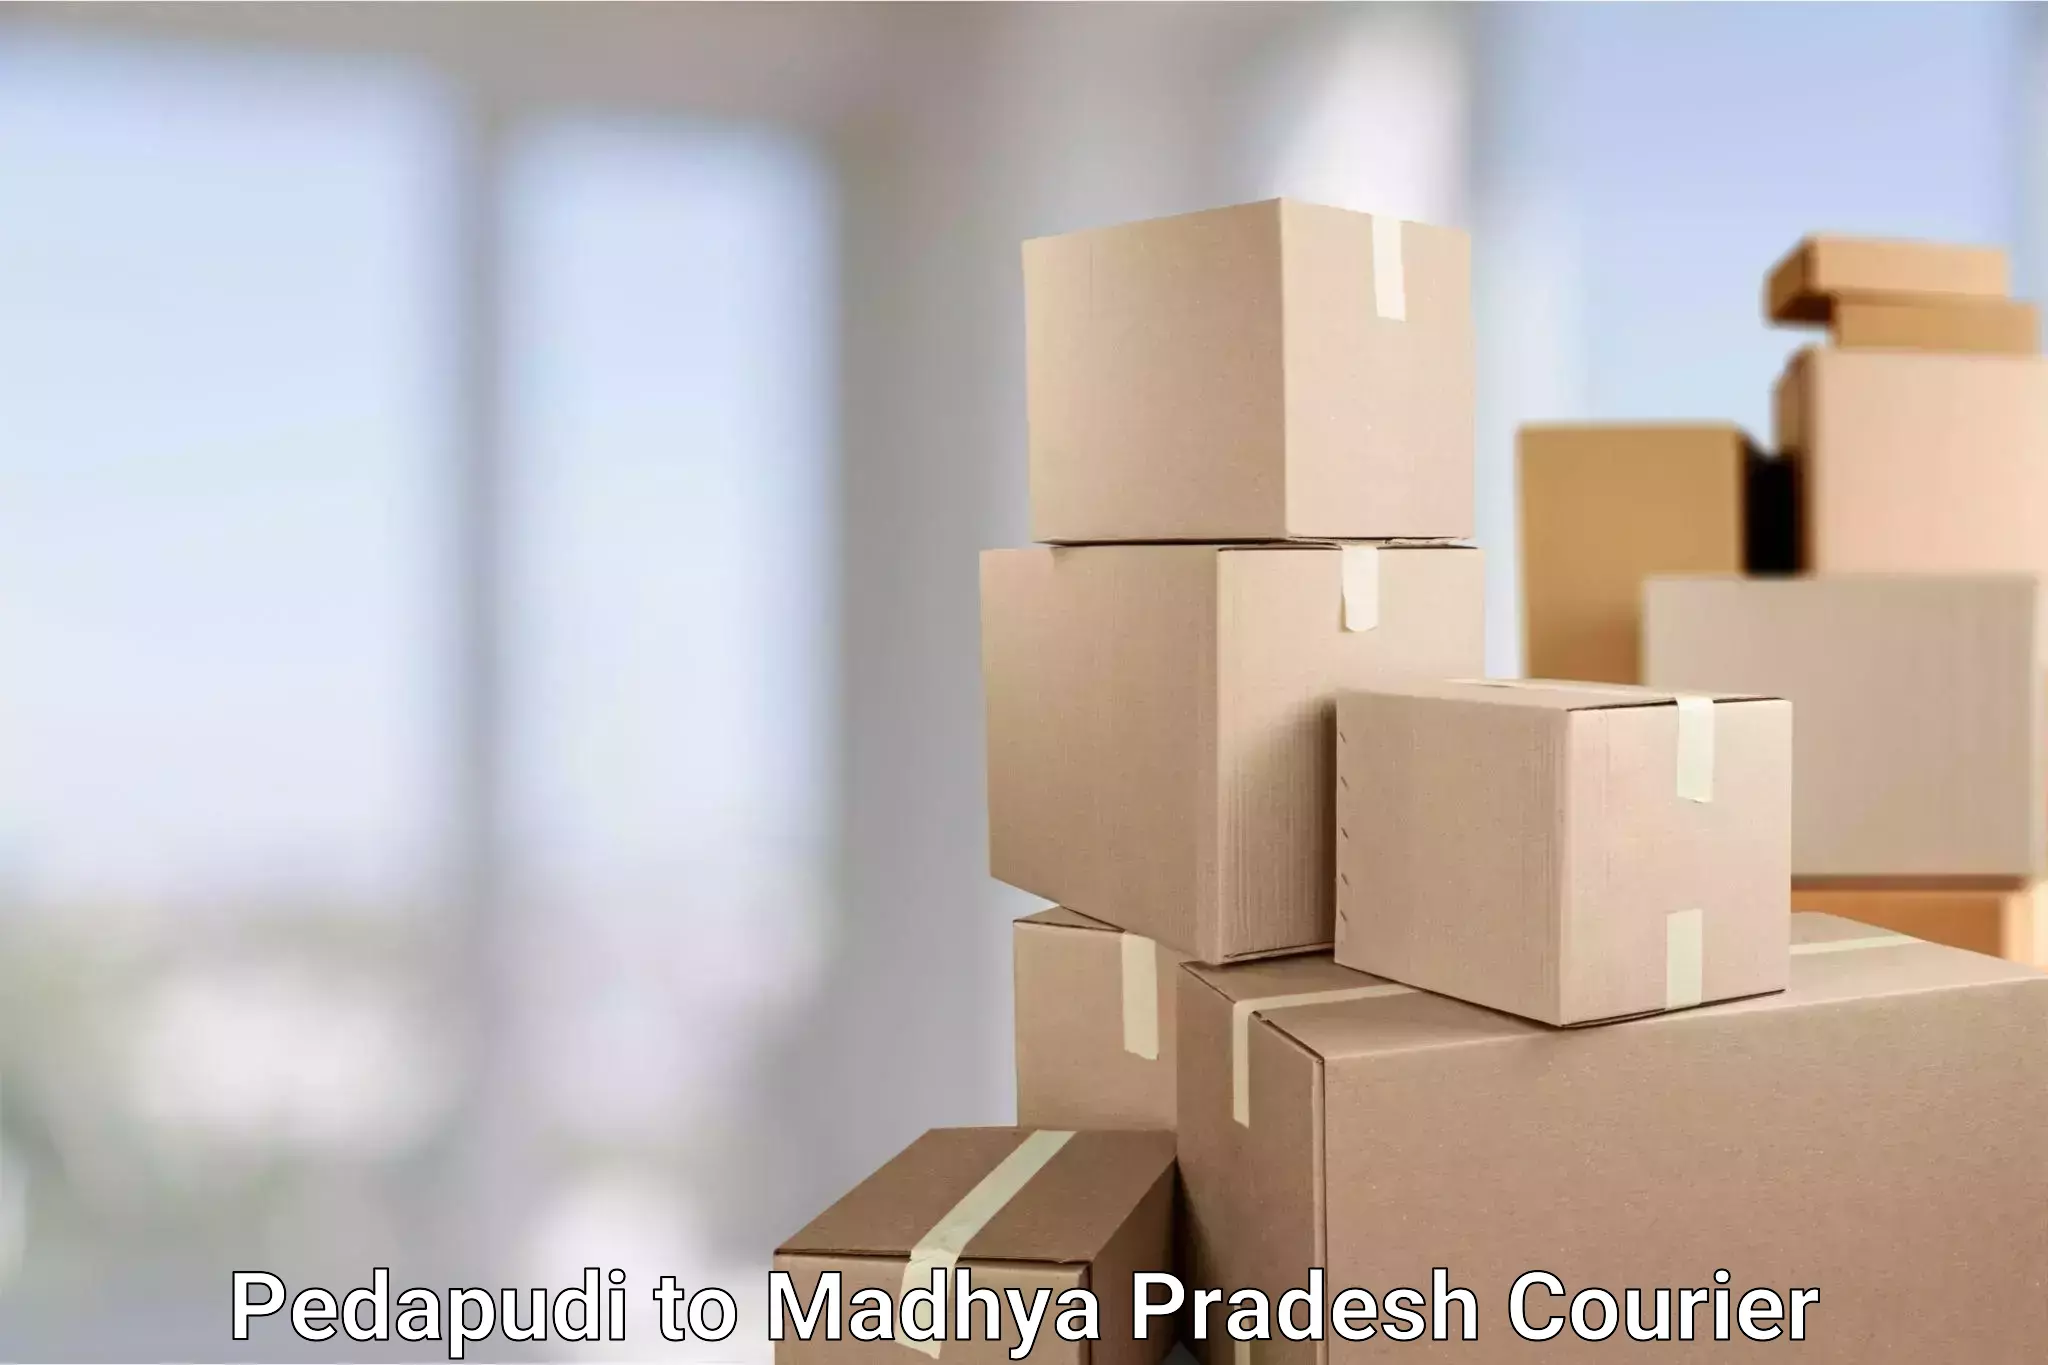 Global courier networks Pedapudi to Amarkantak